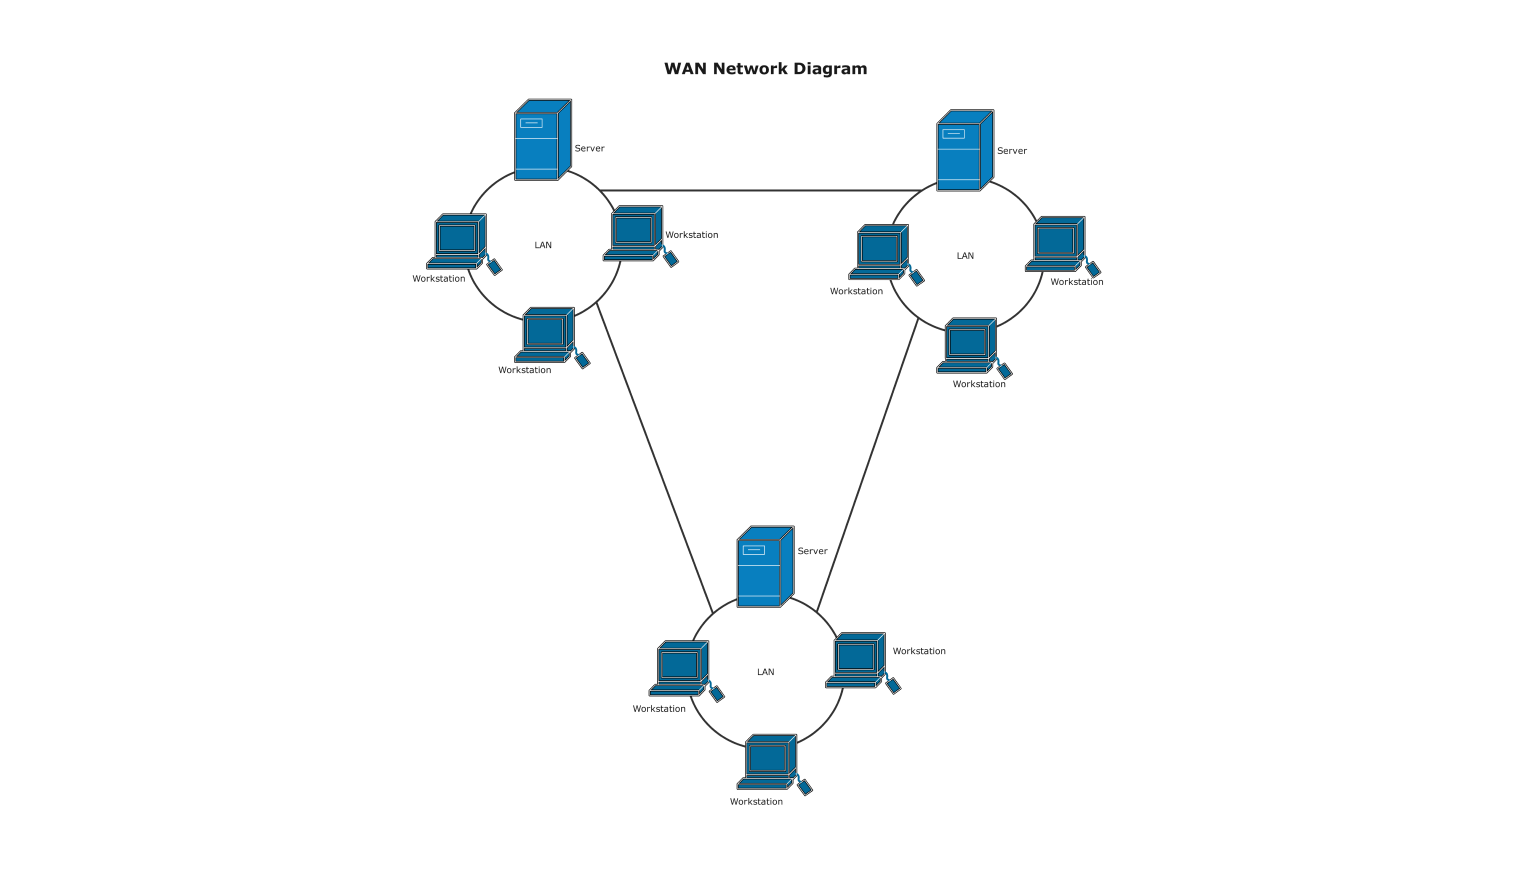 Network Diagram for wan